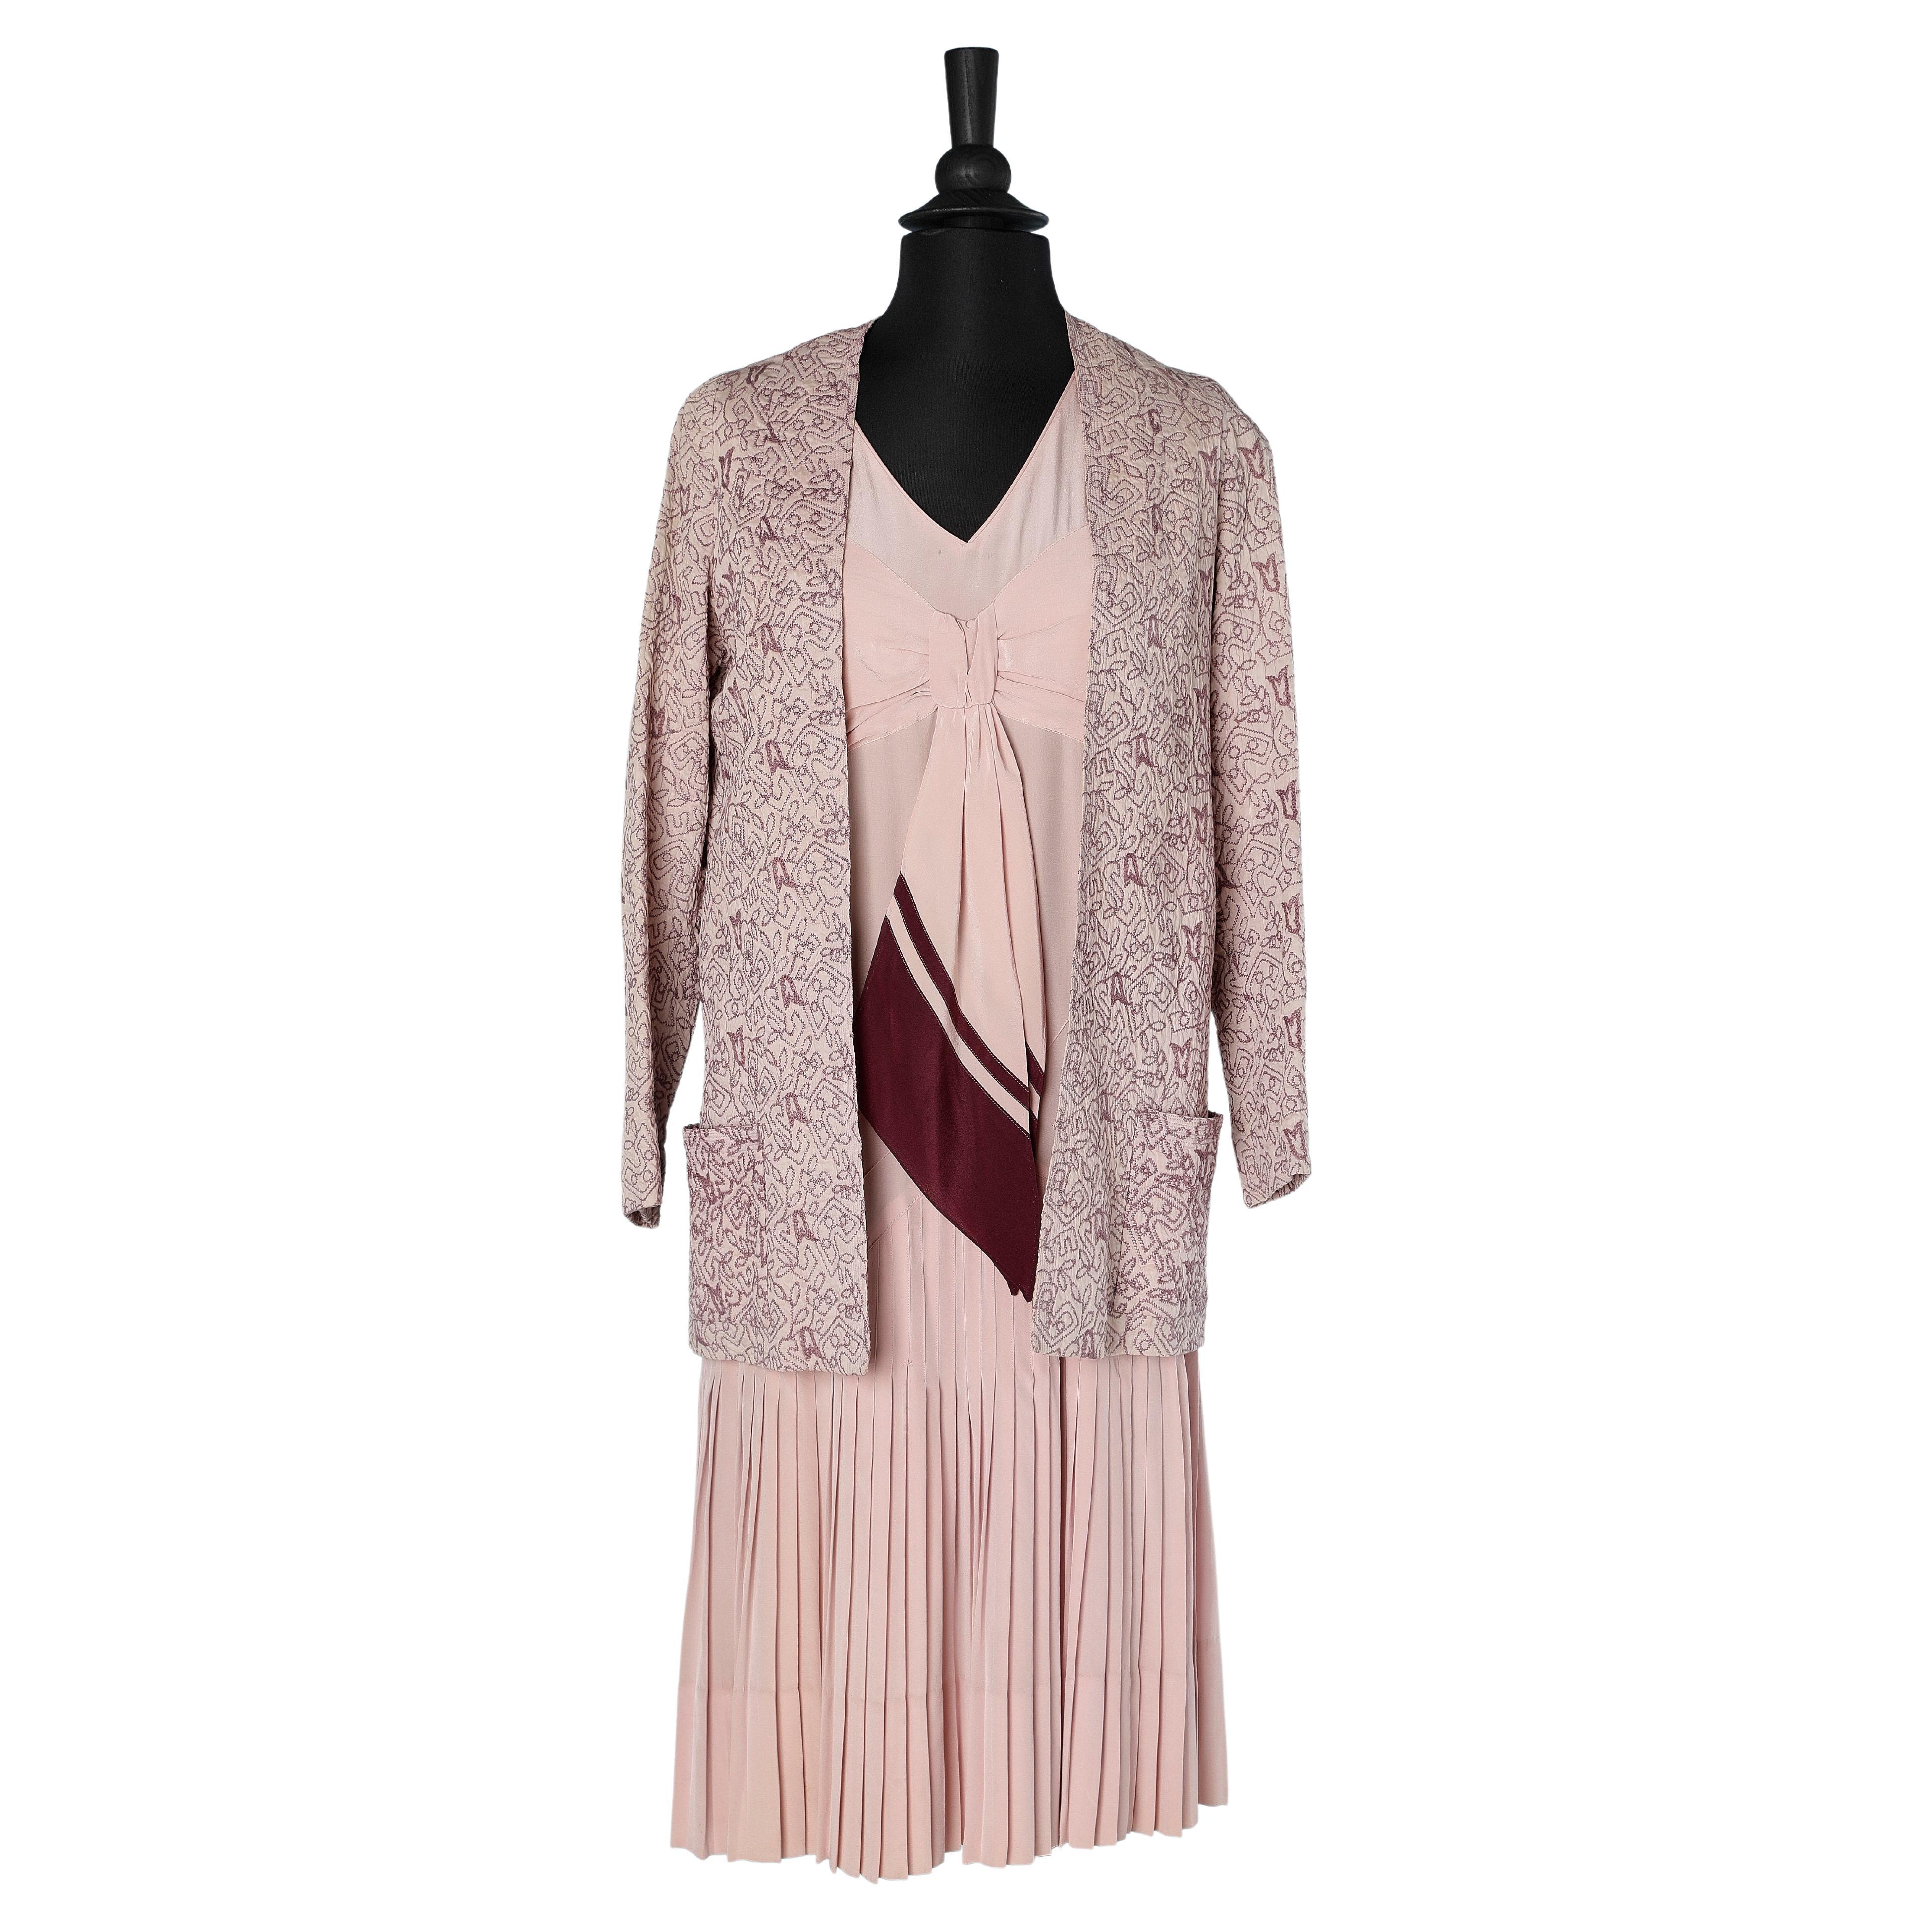 Dress with tie and top-stitched jacket in pale pink silk Circa 1925